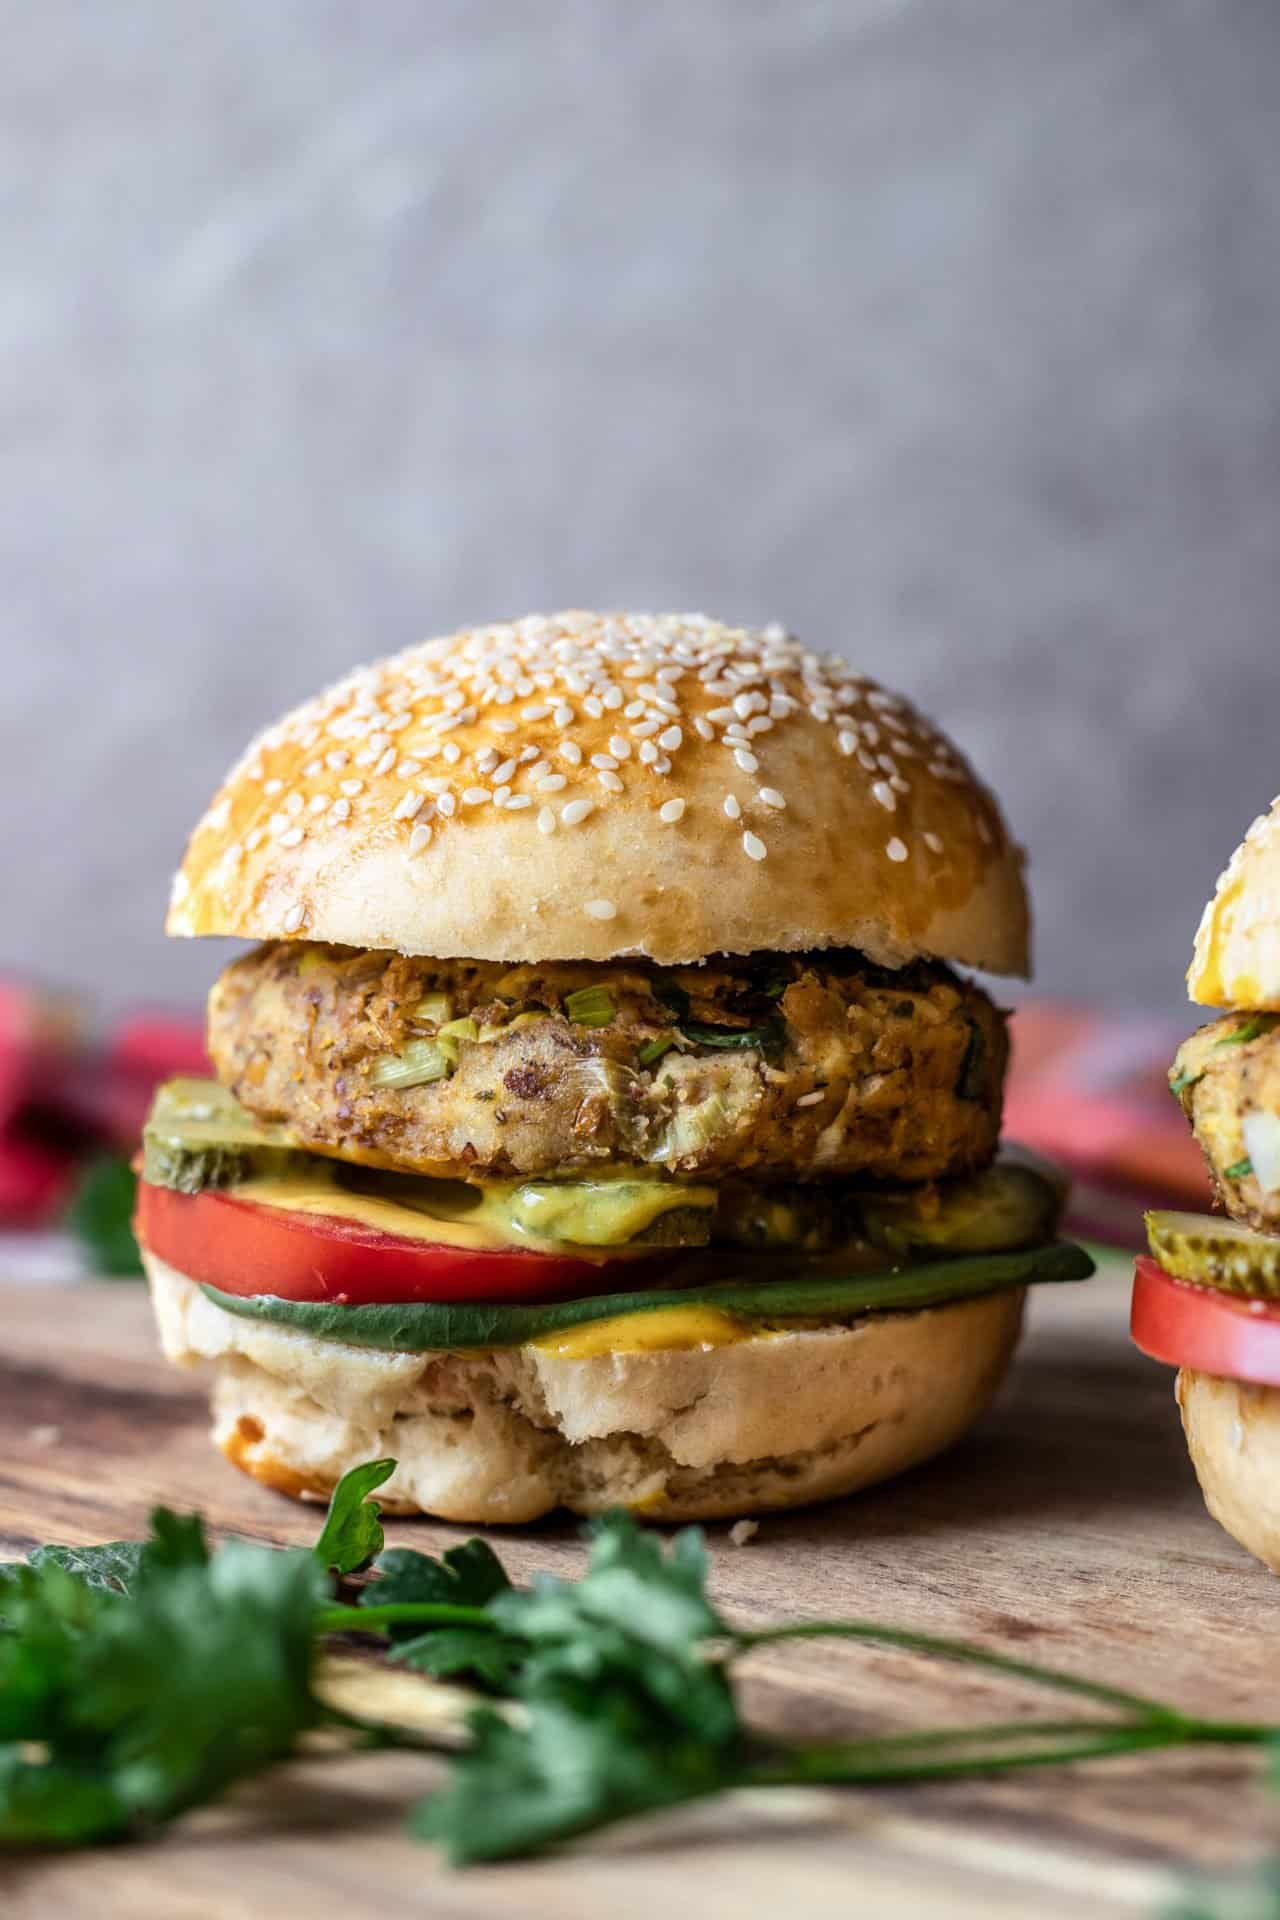 These Vegan Lentil Burgers have the most perfect meaty texture and flavour! The best part is that they take less than 15min to make!